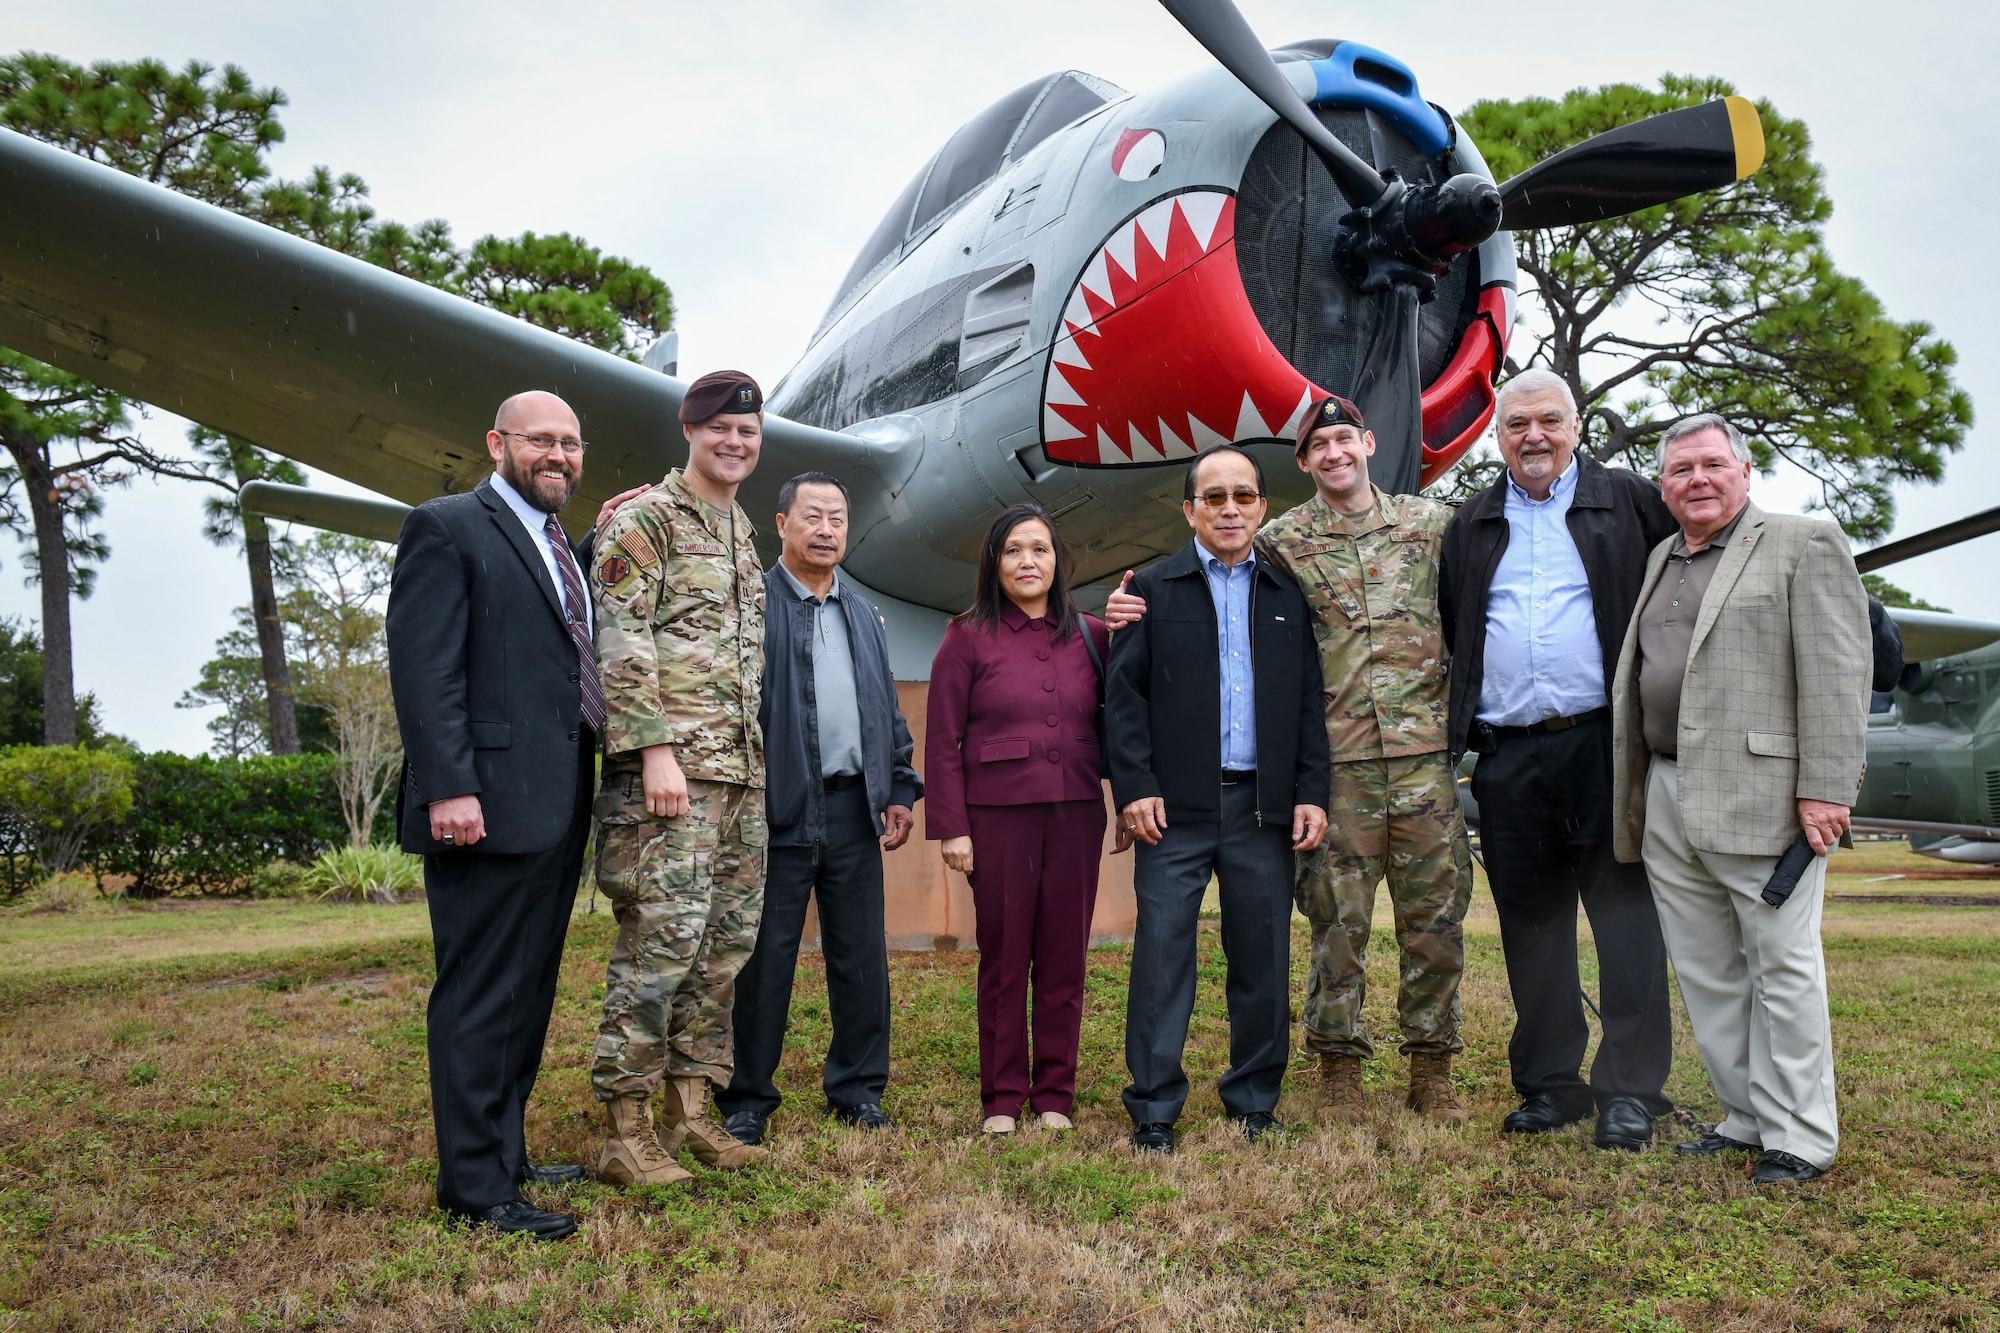 U.S. Air Force Special Operations School hosted two Vietnam-era U.S. pilots, two Hmong pilots and Dr. Chia Youyee Vang, University of Wisconsin-Milwaukee professor and author of “Fly Until You Die,” during the latest ‘USAFSOS Presents’ event on Oct 18.